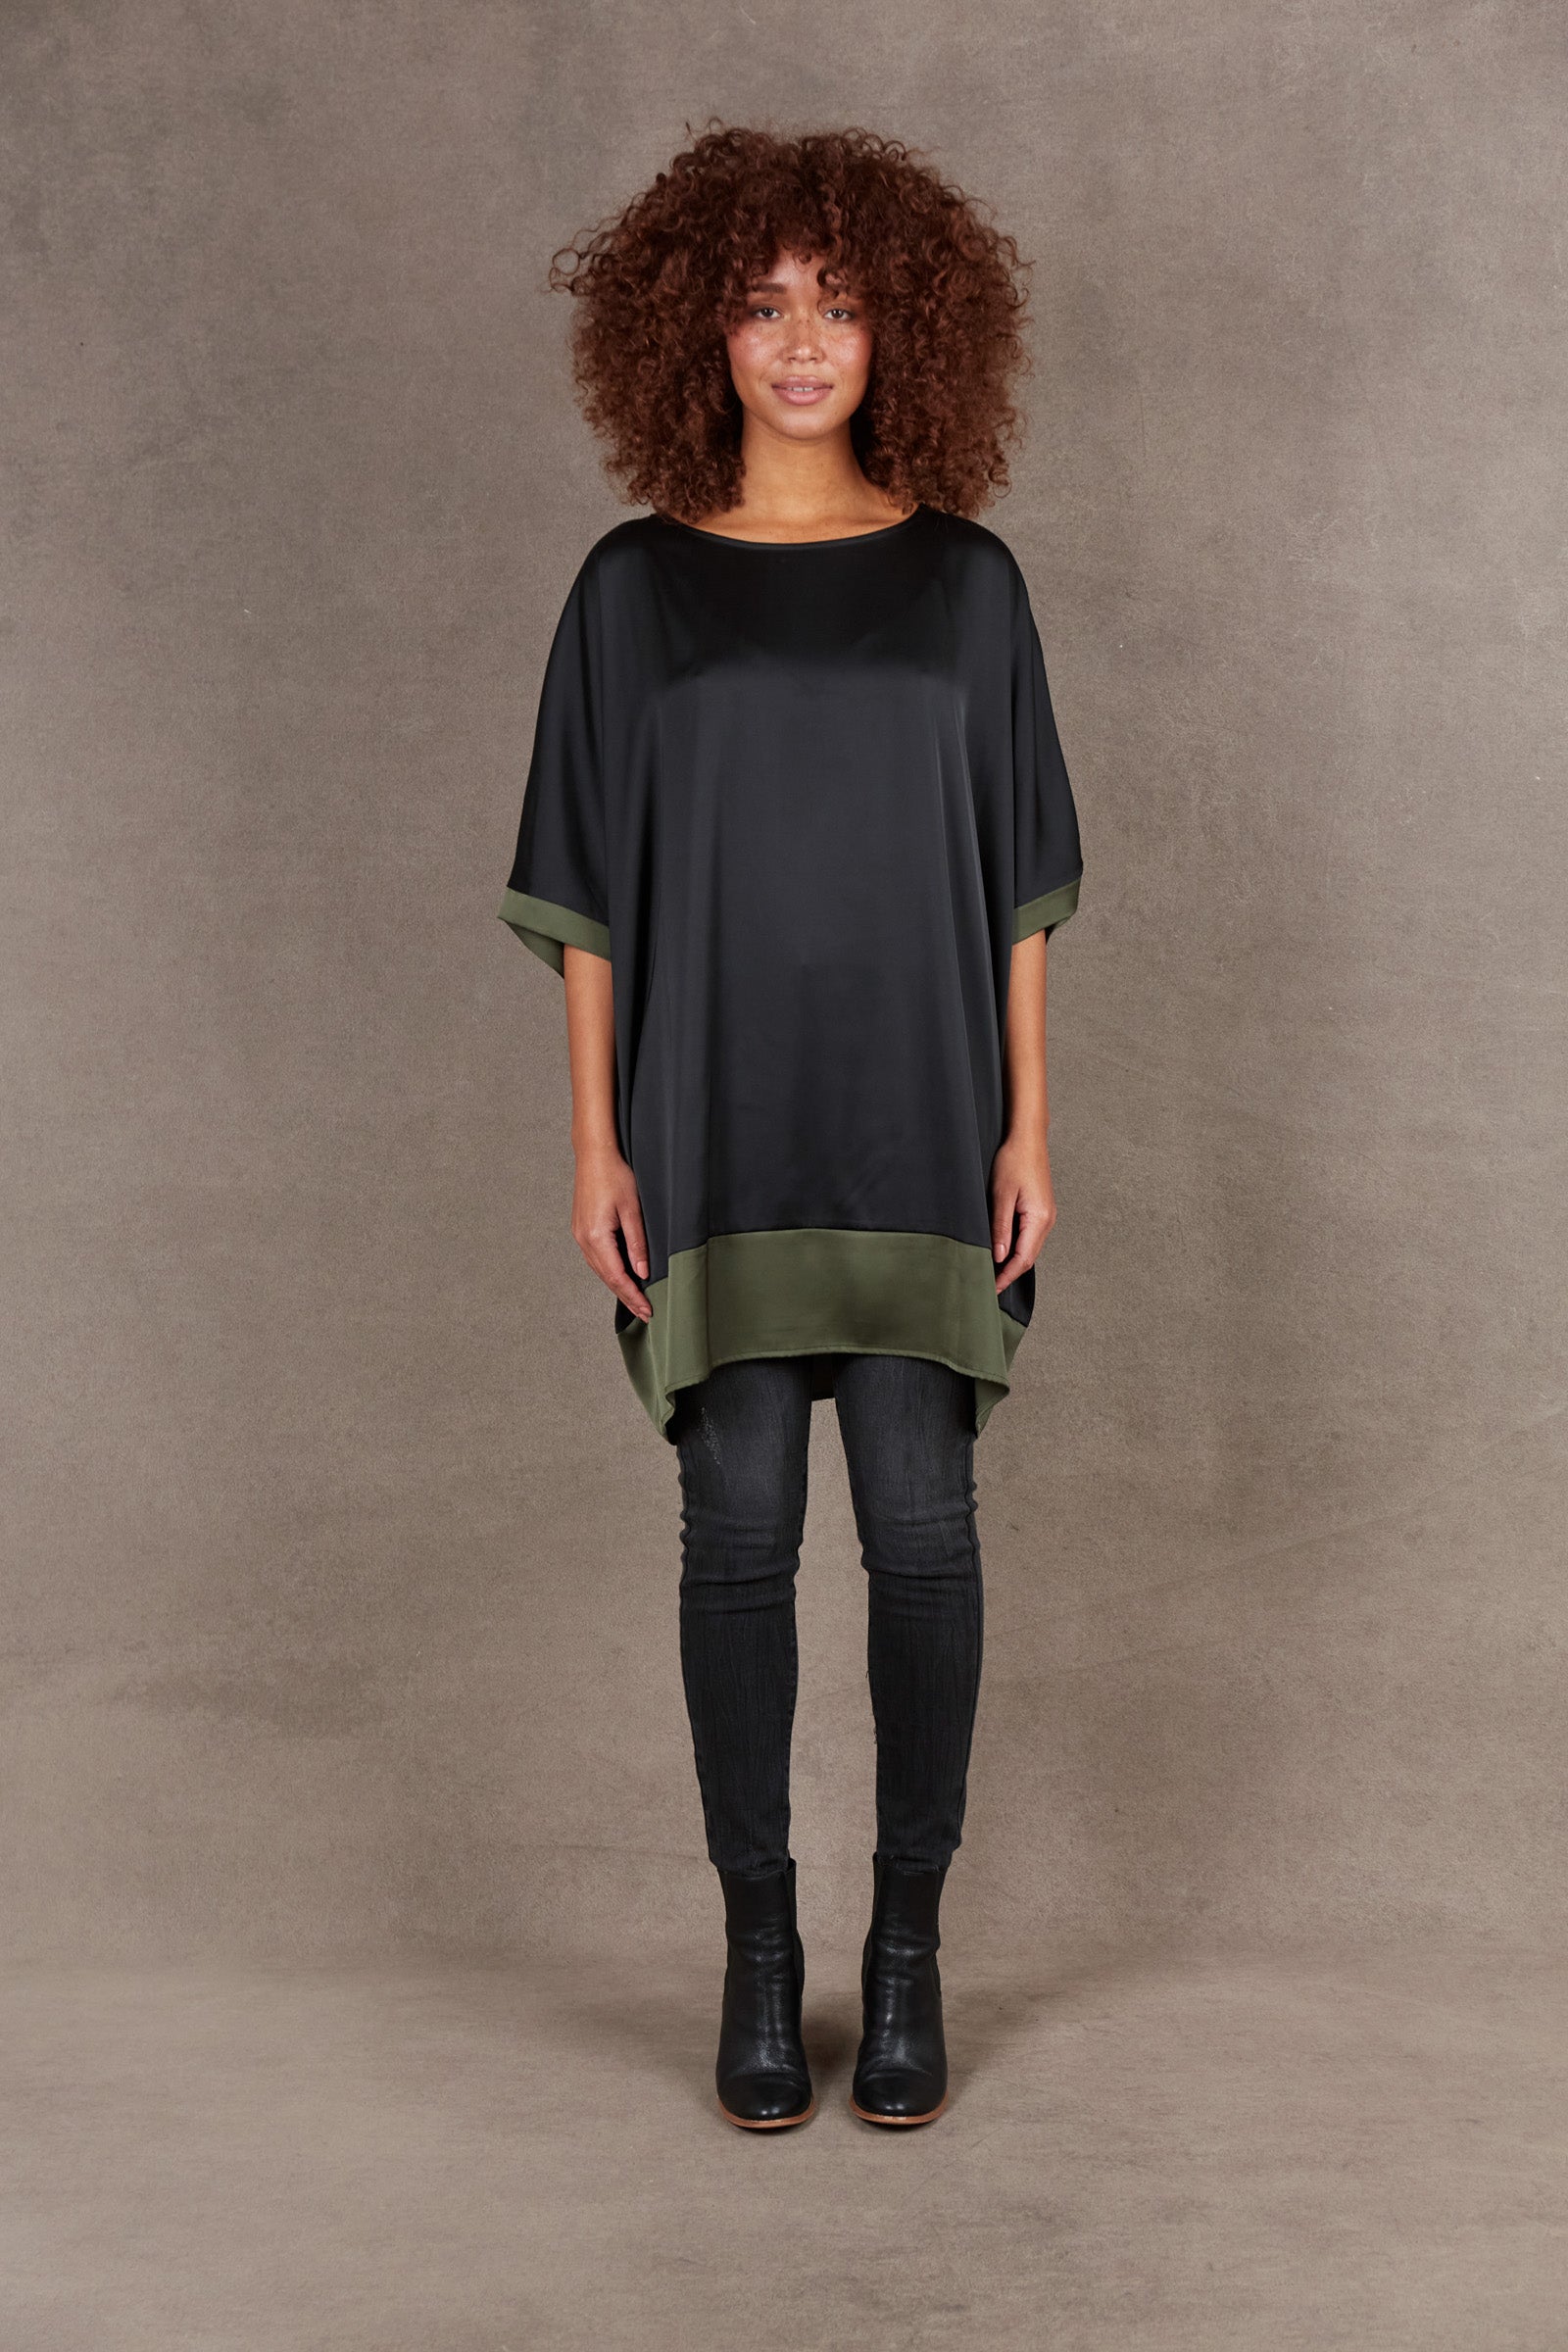 Norse Relax Top - Ebony - eb&ive Clothing - Top One Size Dressy